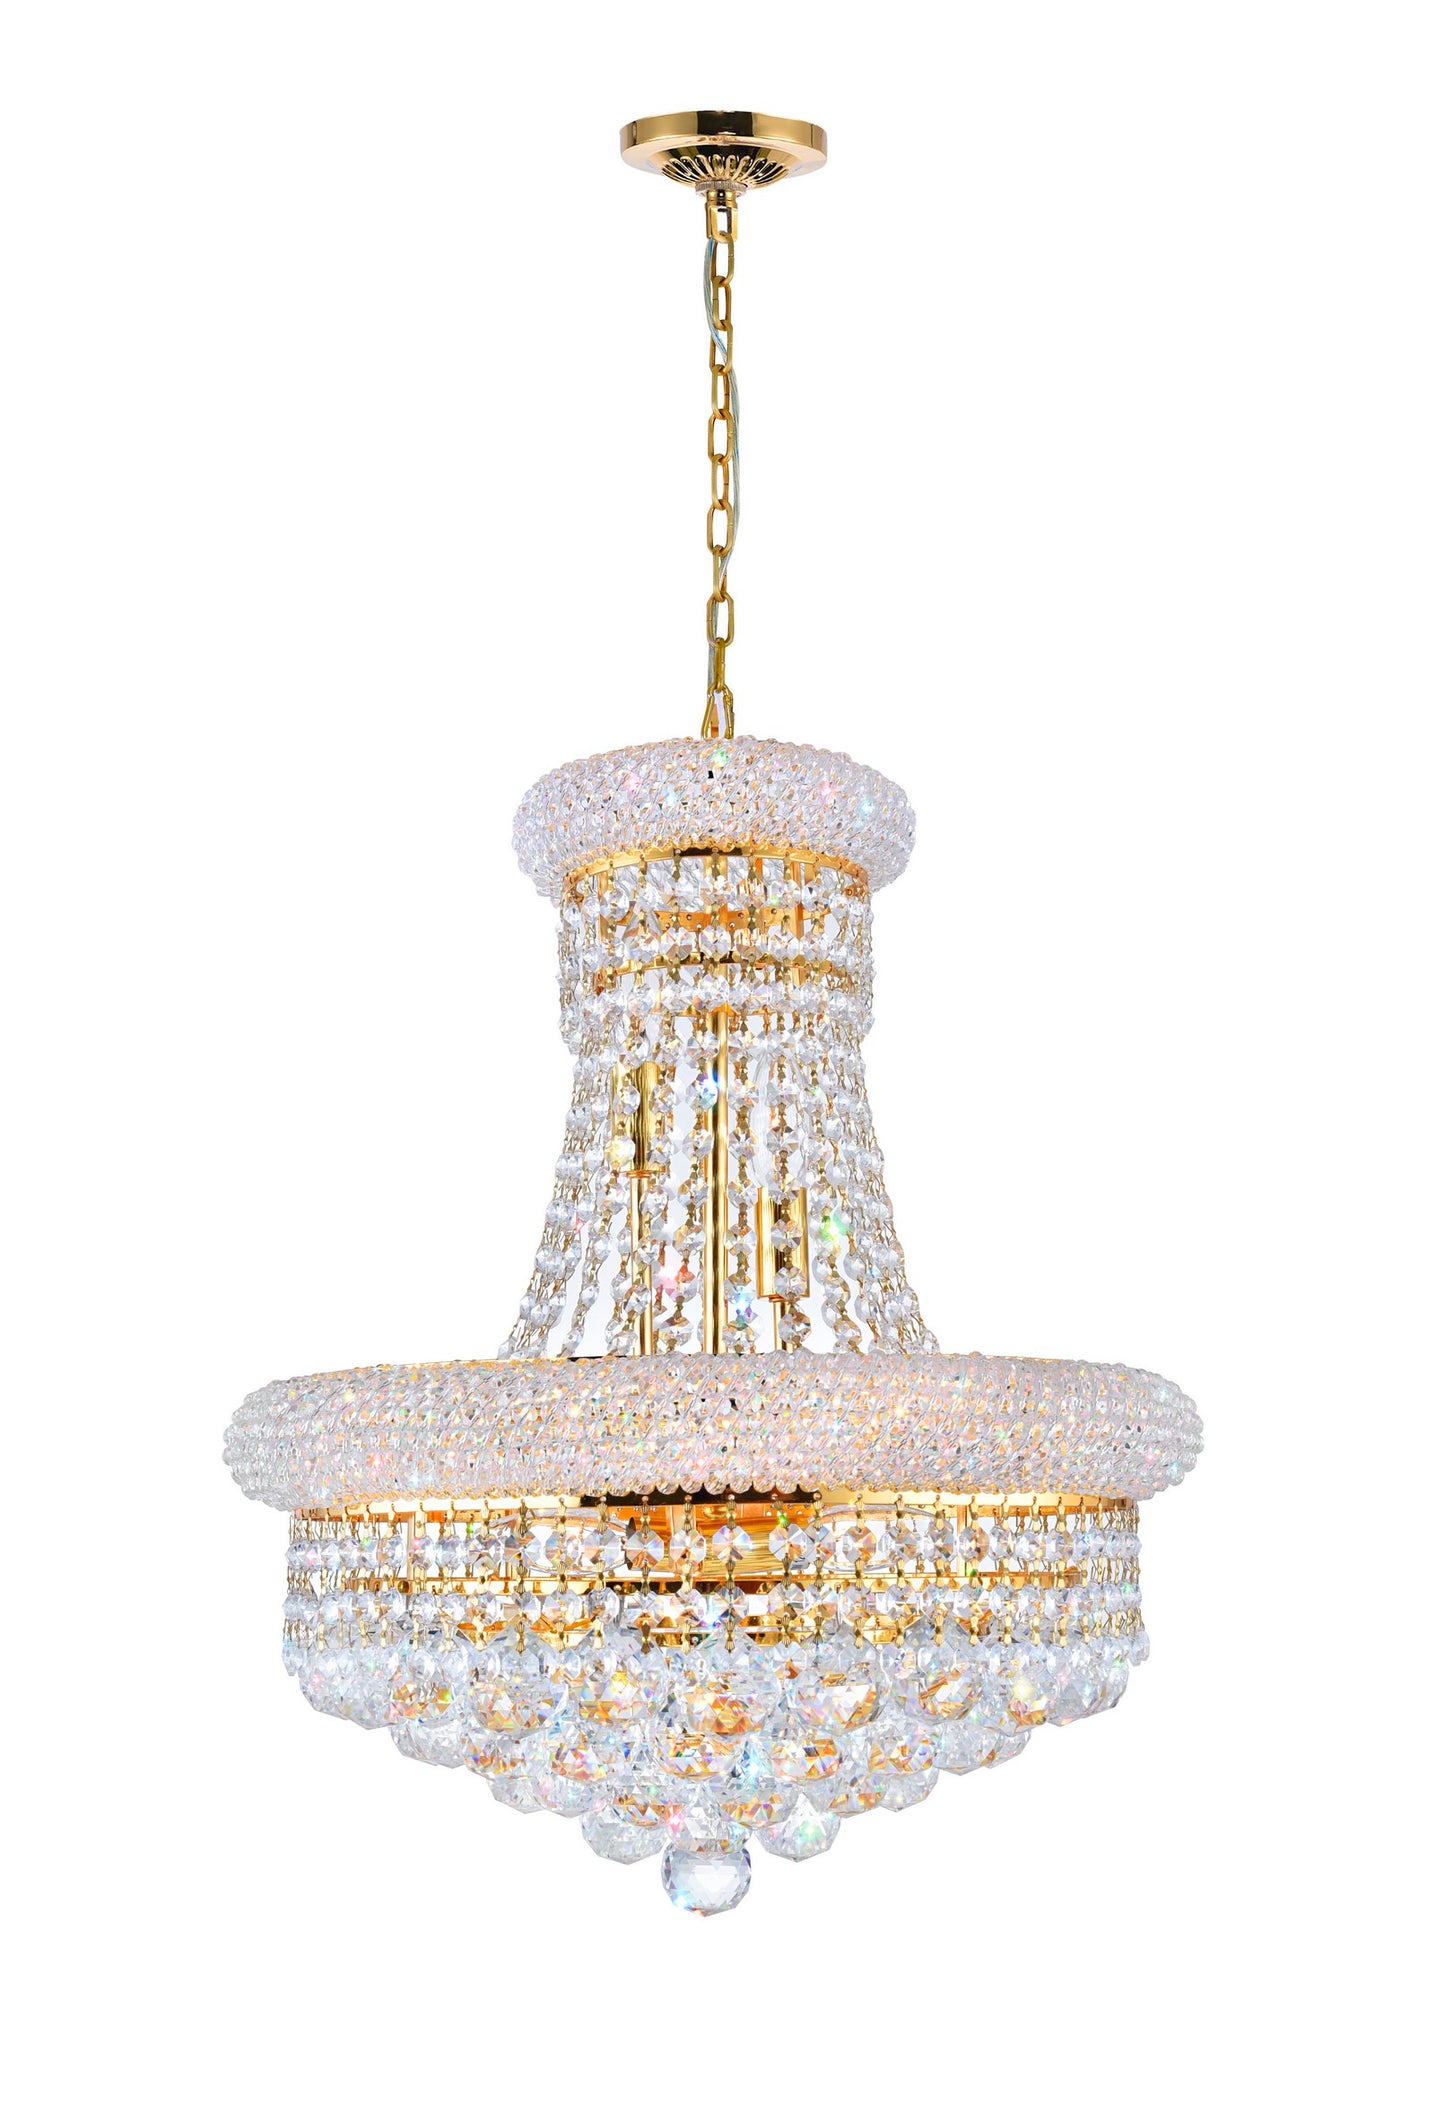 8 LIGHT DOWN CHANDELIER WITH GOLD FINISH - Dreamart Gallery